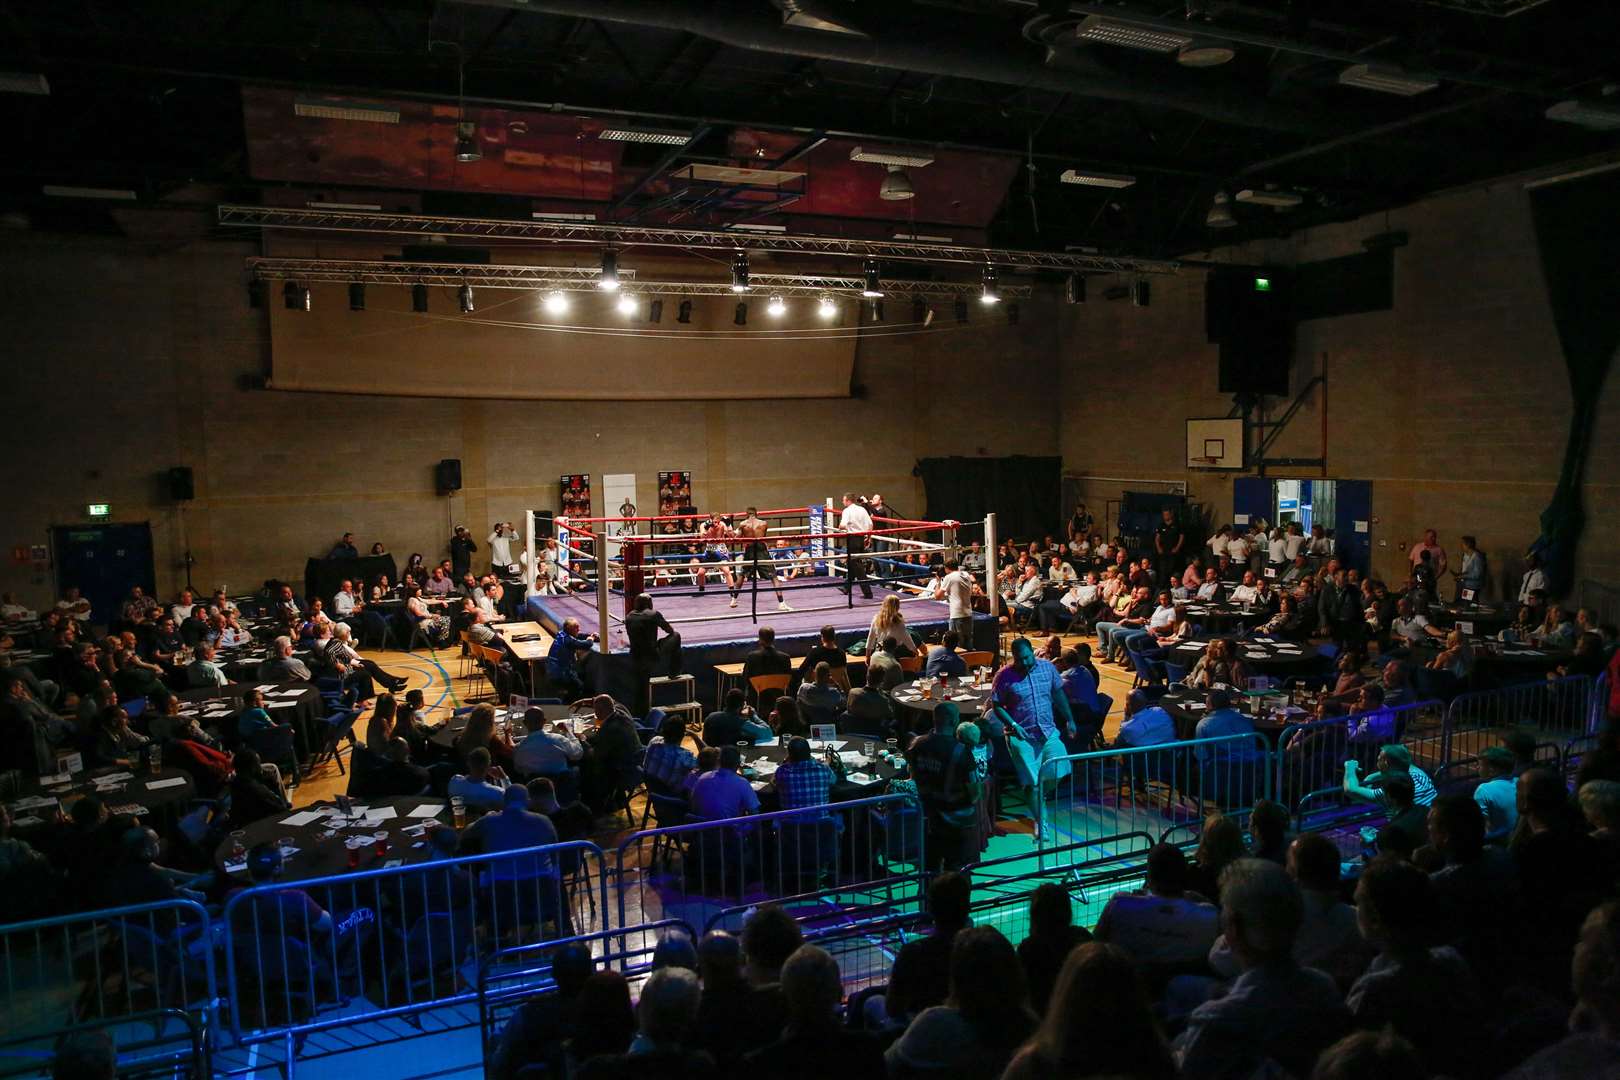 Maidstone Leisure Centre hosts professional boxing for the first time in 16 years Picture: Matthew Walker